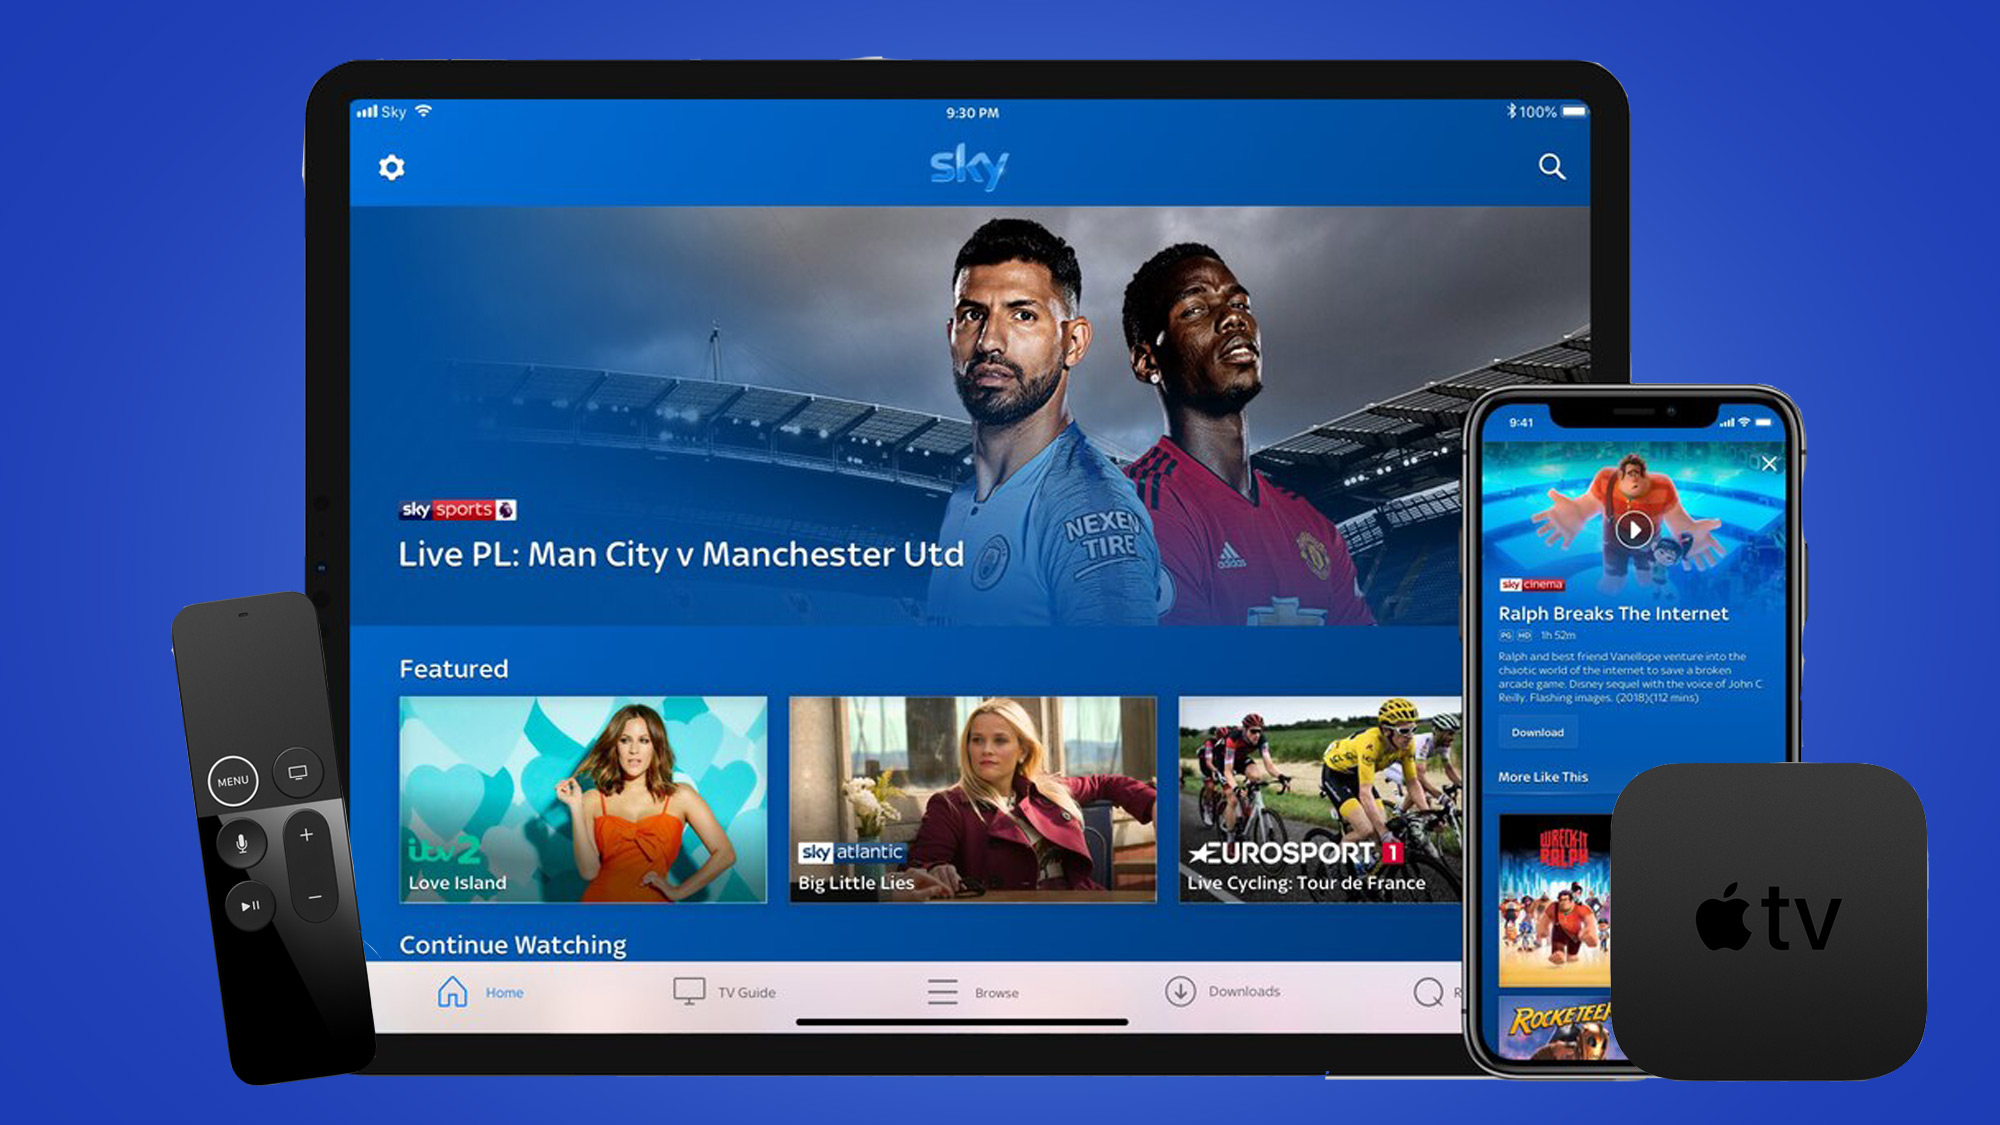 Sky Go On Apple Tv How To Watch, Can I Mirror Sky Sports From Ipad To Apple Tv